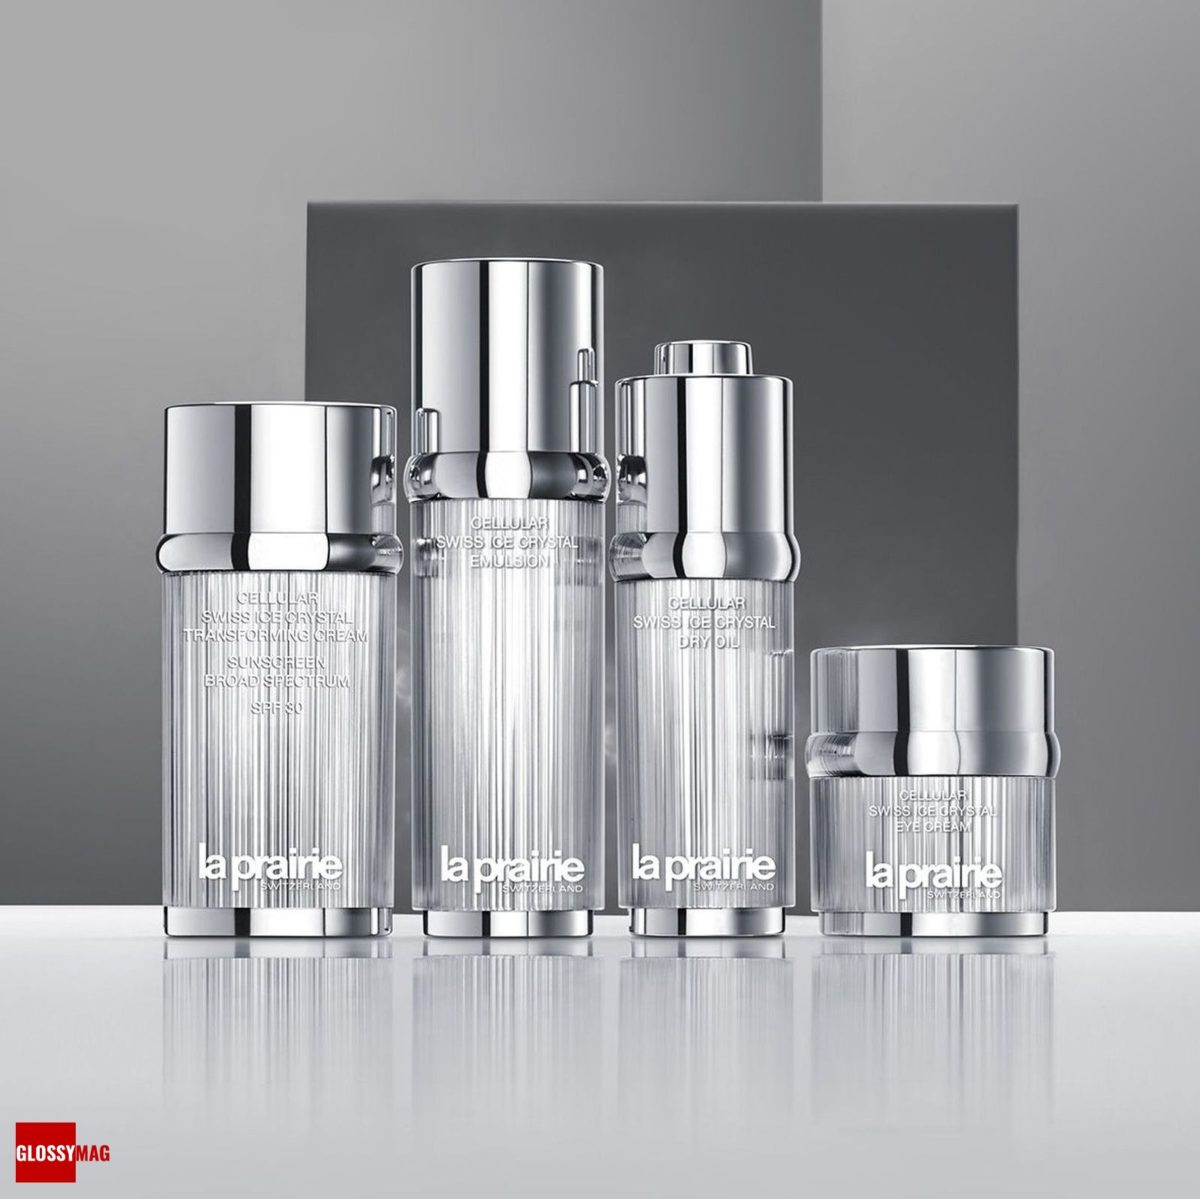 La Prairie, The Cellular Swiss Ice Crystal Collection